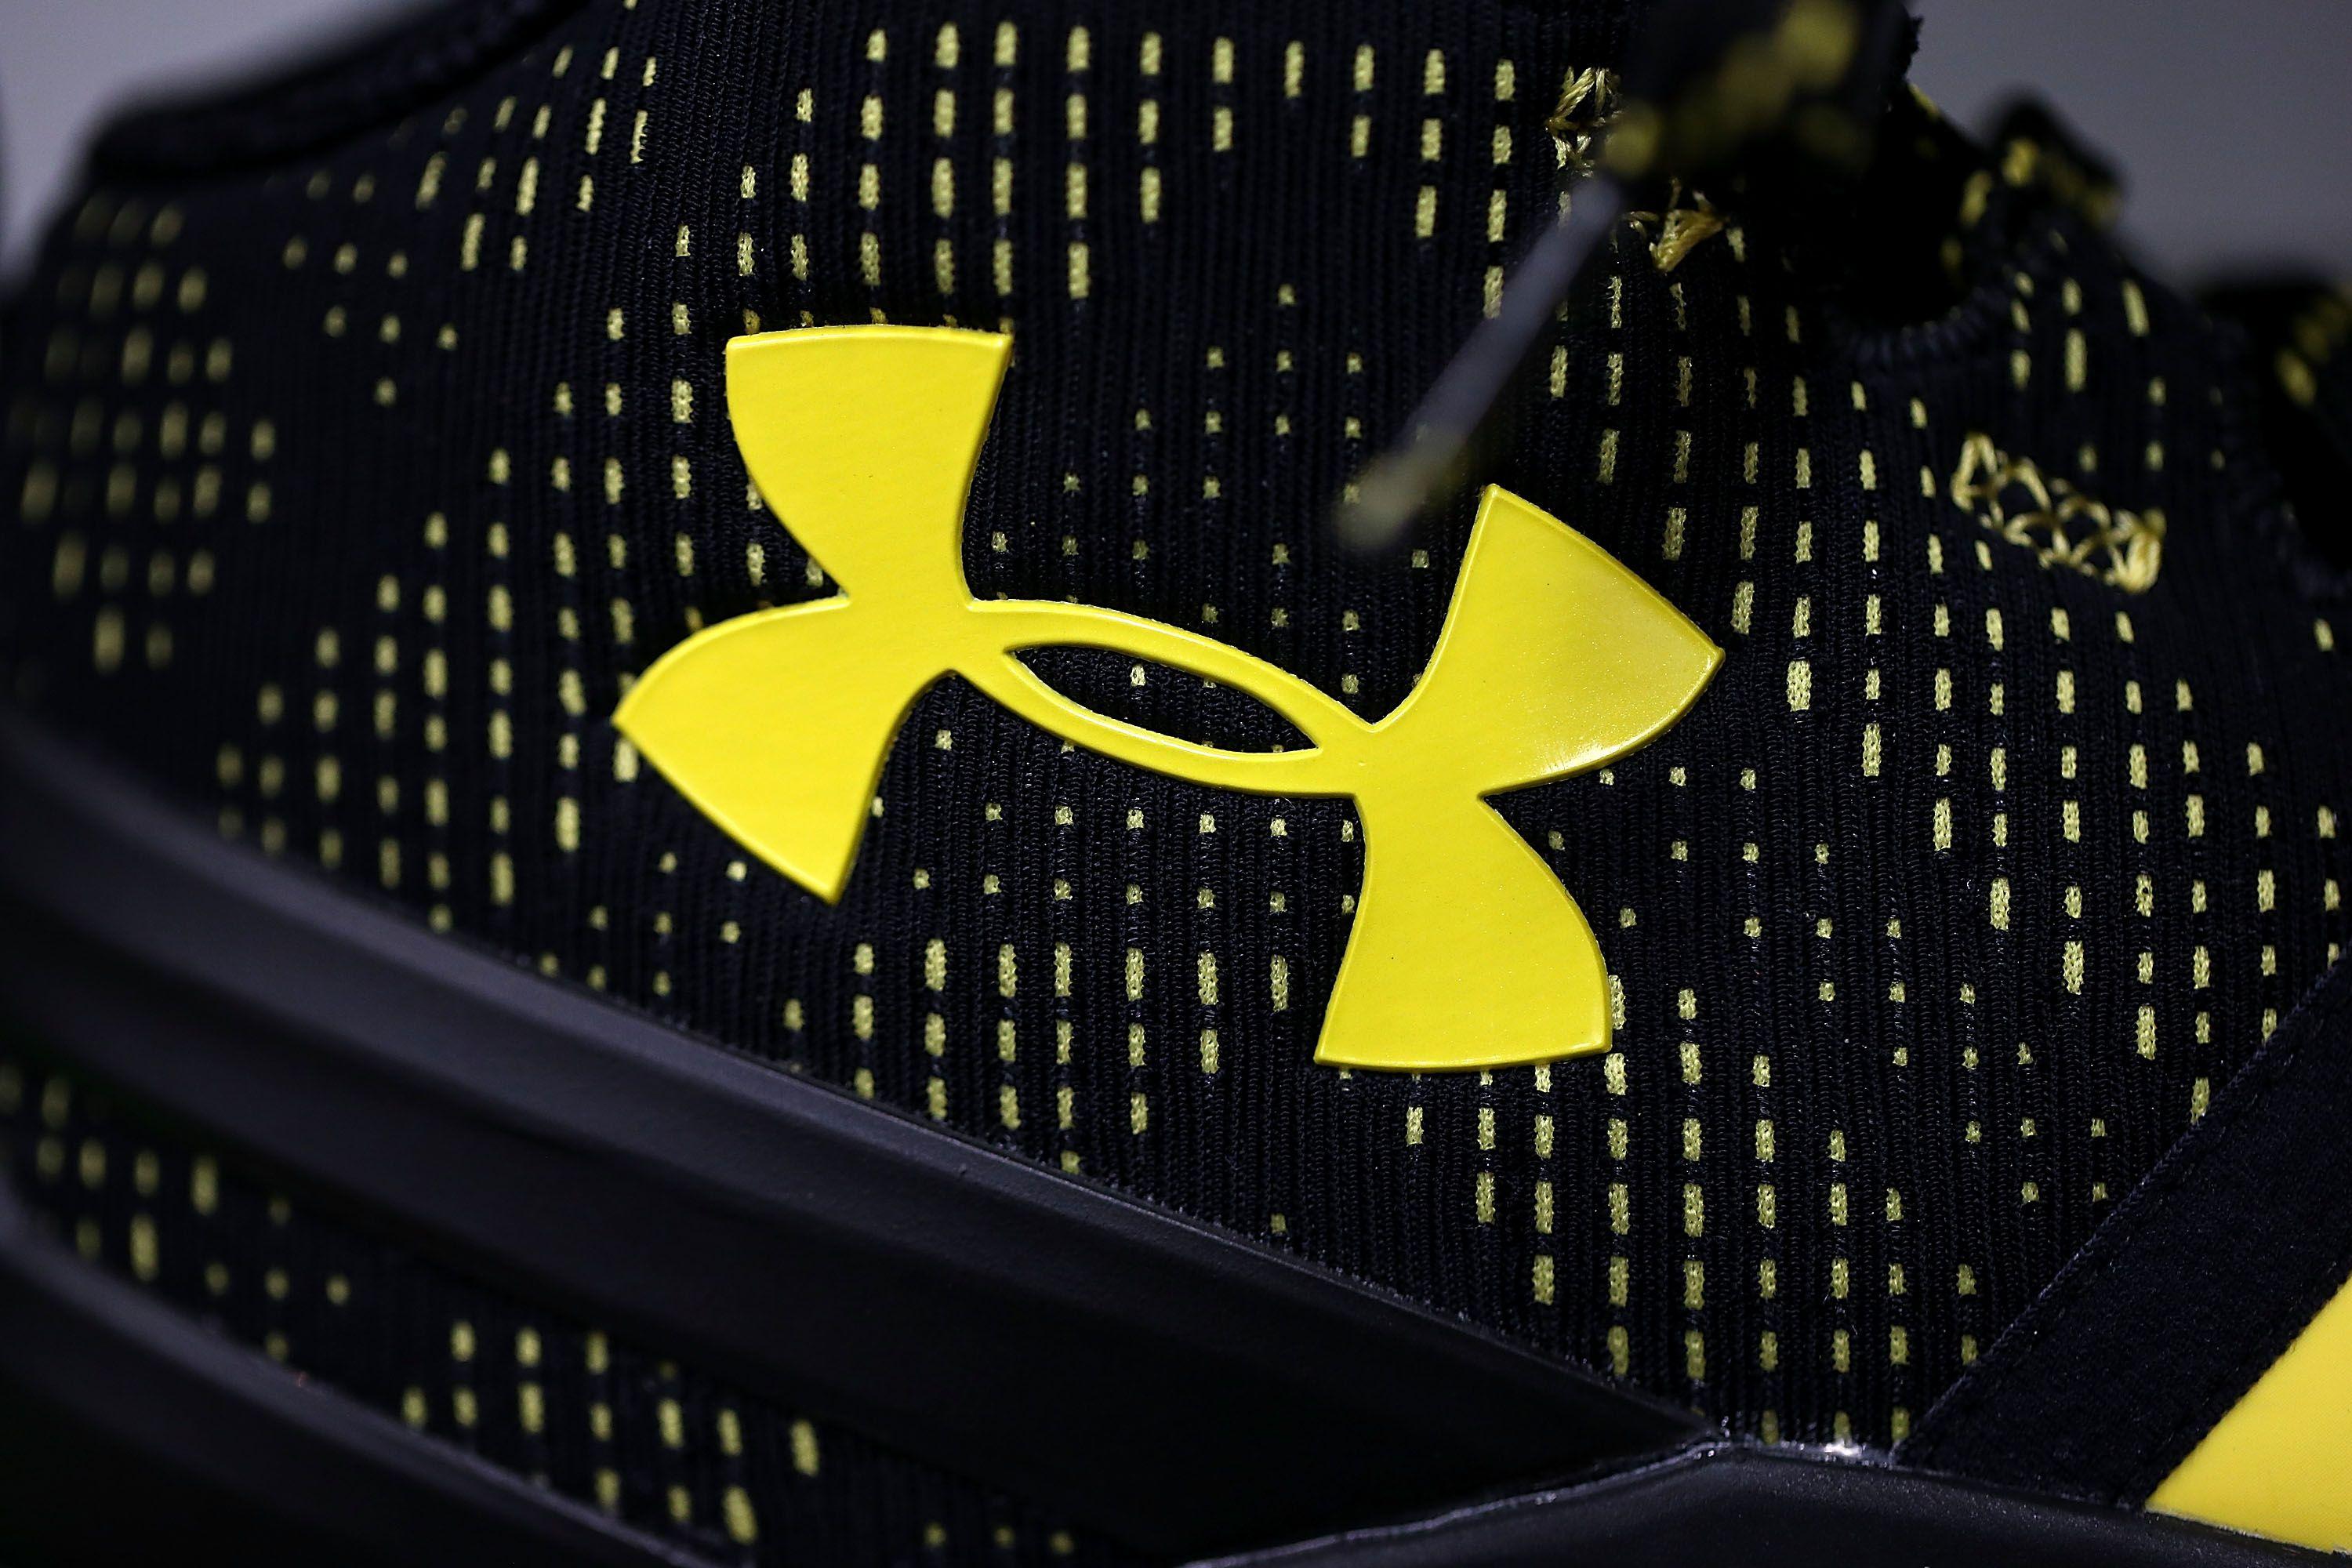 Cool Under Armour Basketball Logo - Under Armour Signs Deal With UC Berkeley, Replacing Nike | Fortune